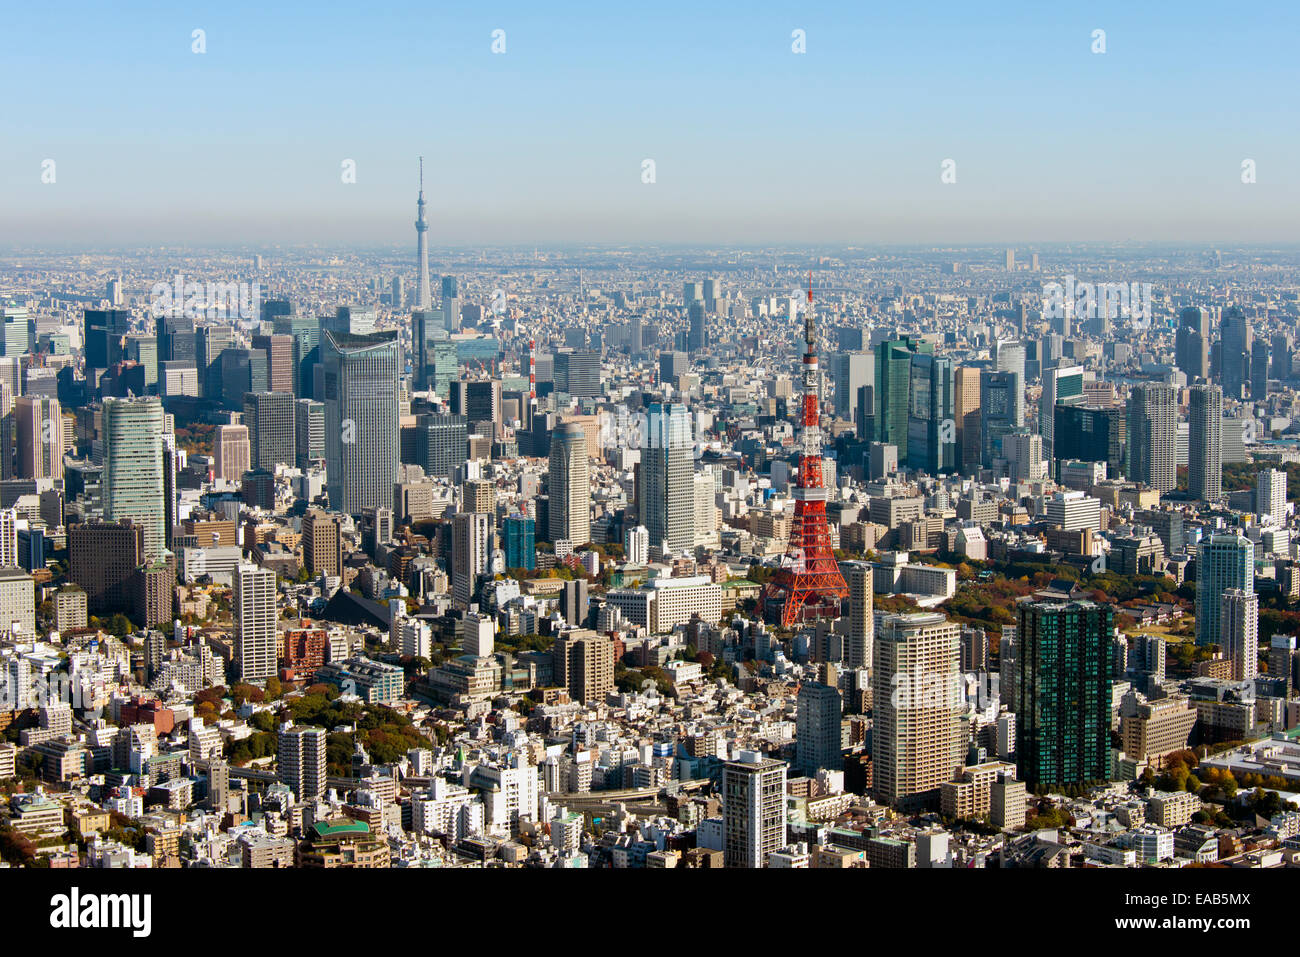 Tokyo Sky tree and Tokyo Tower Aerial view Stock Photo